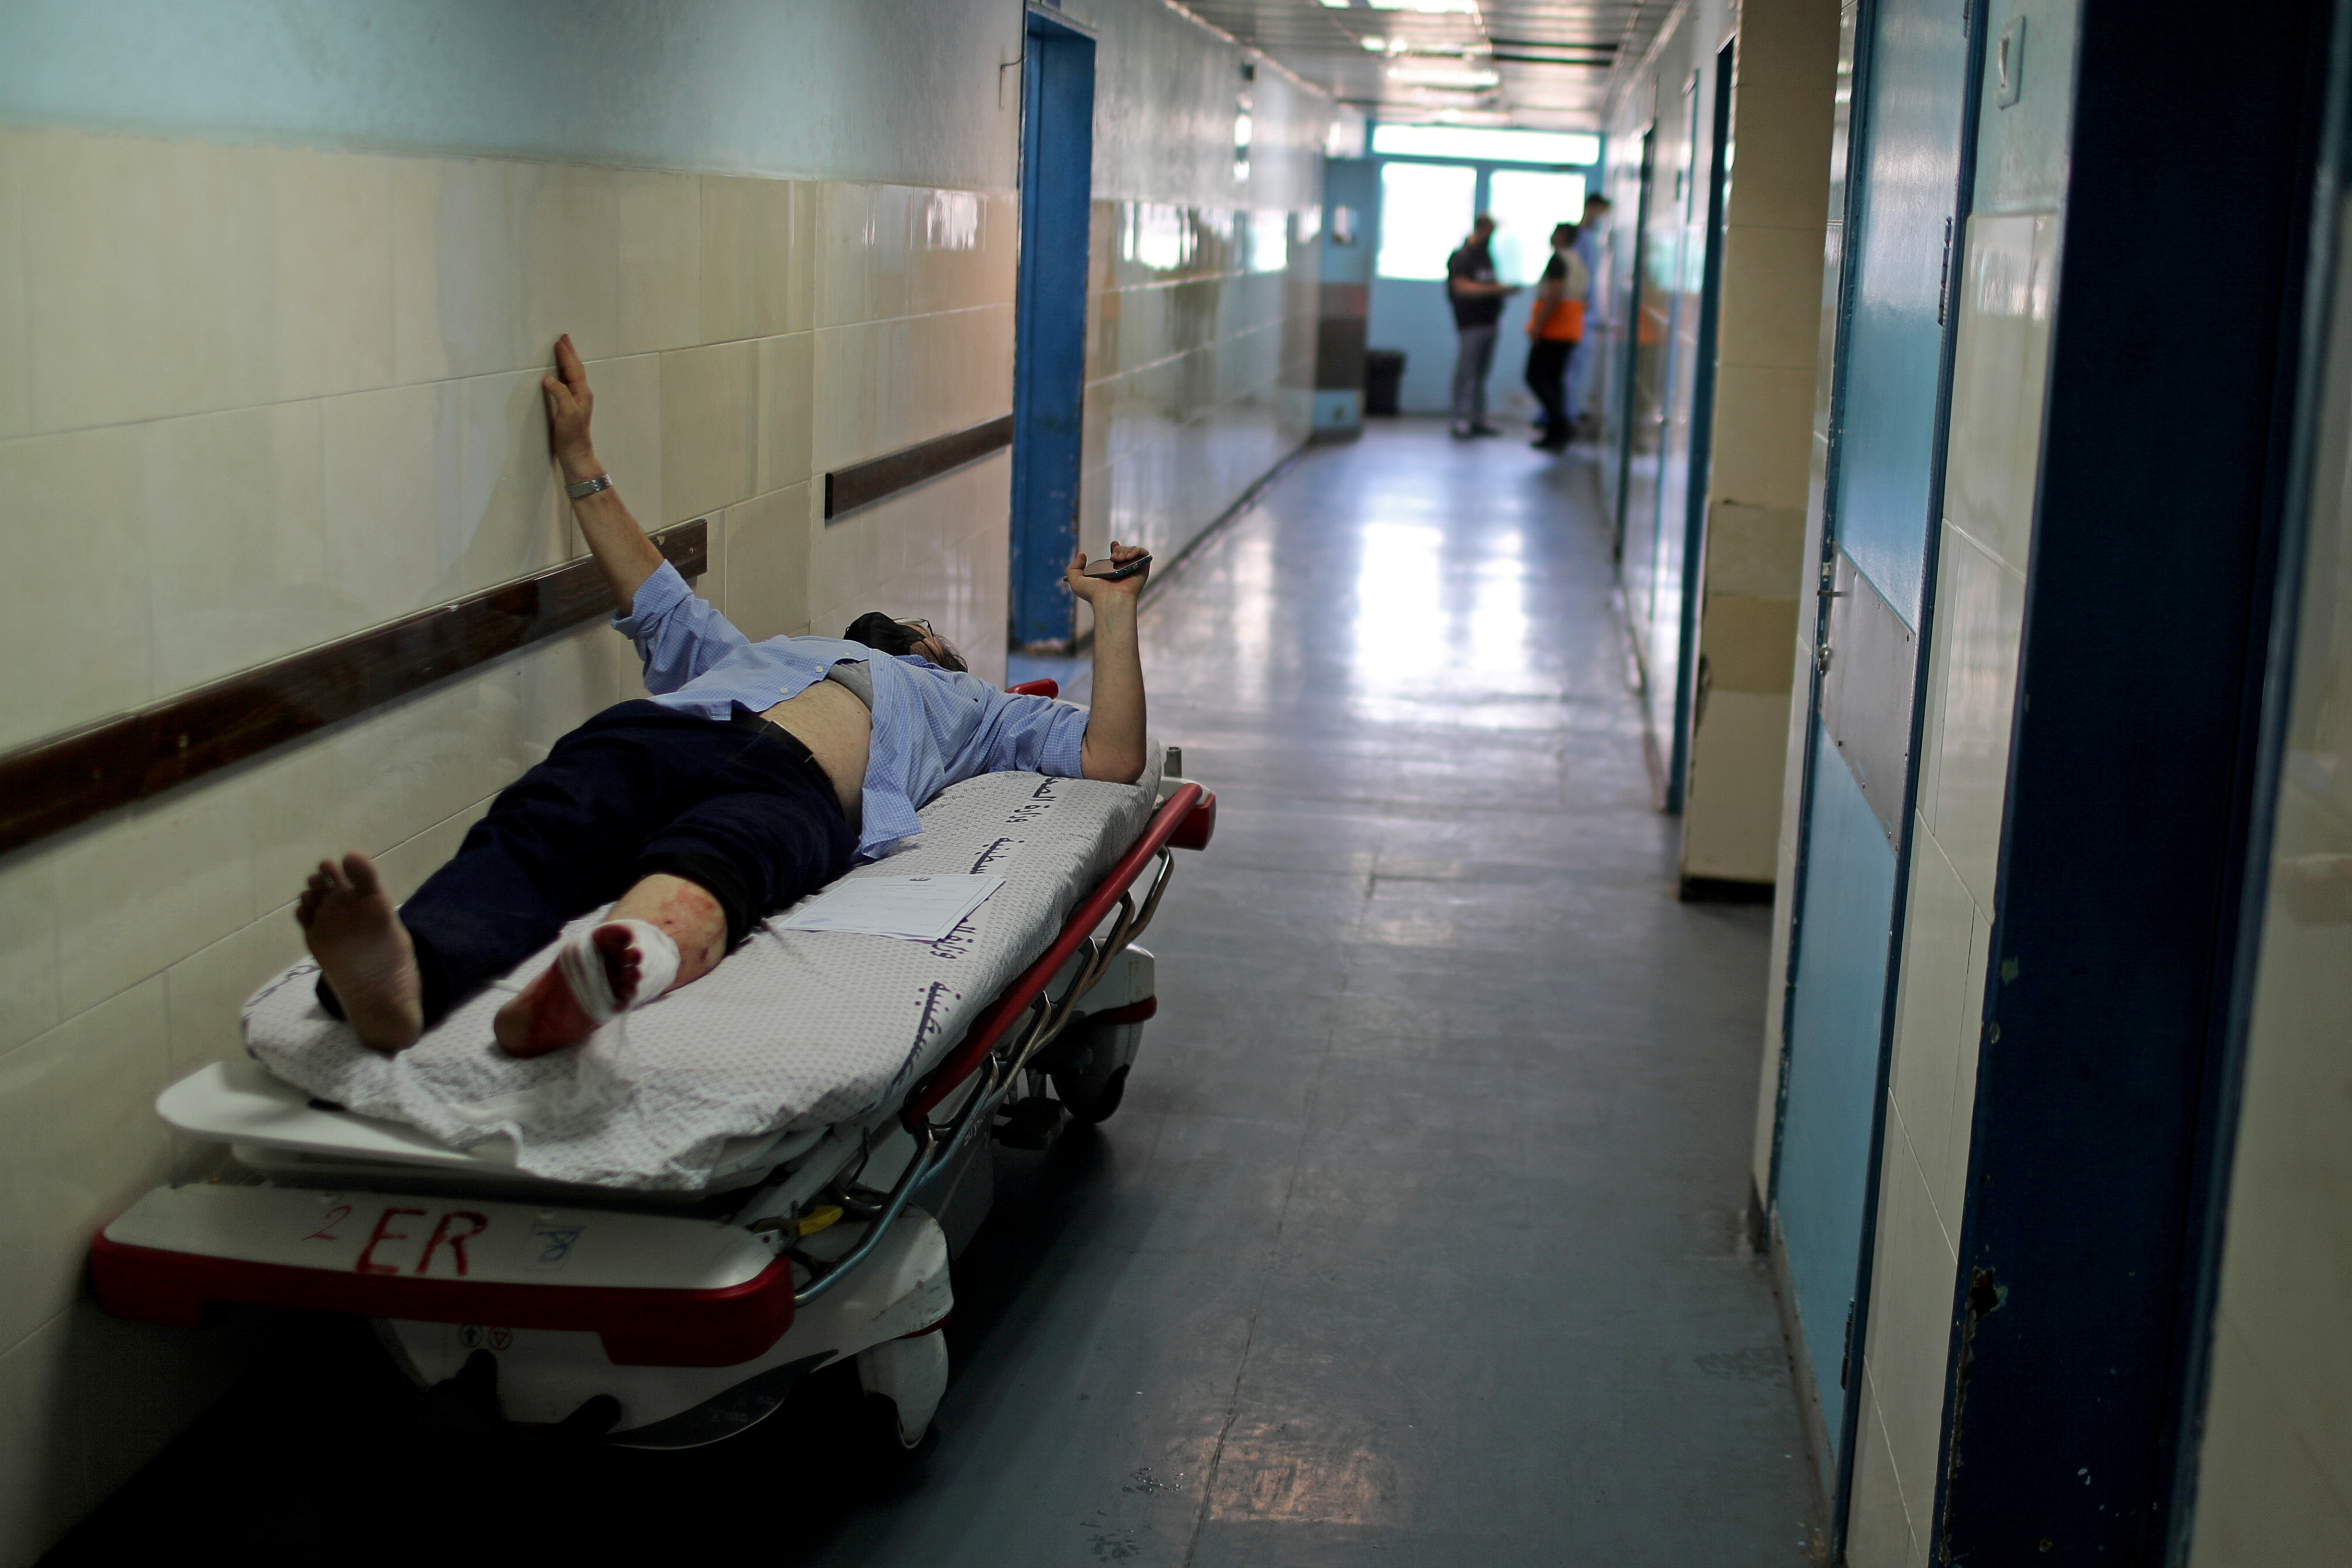 Gaza health system fight on two fronts, Covid-19 and war with Israel